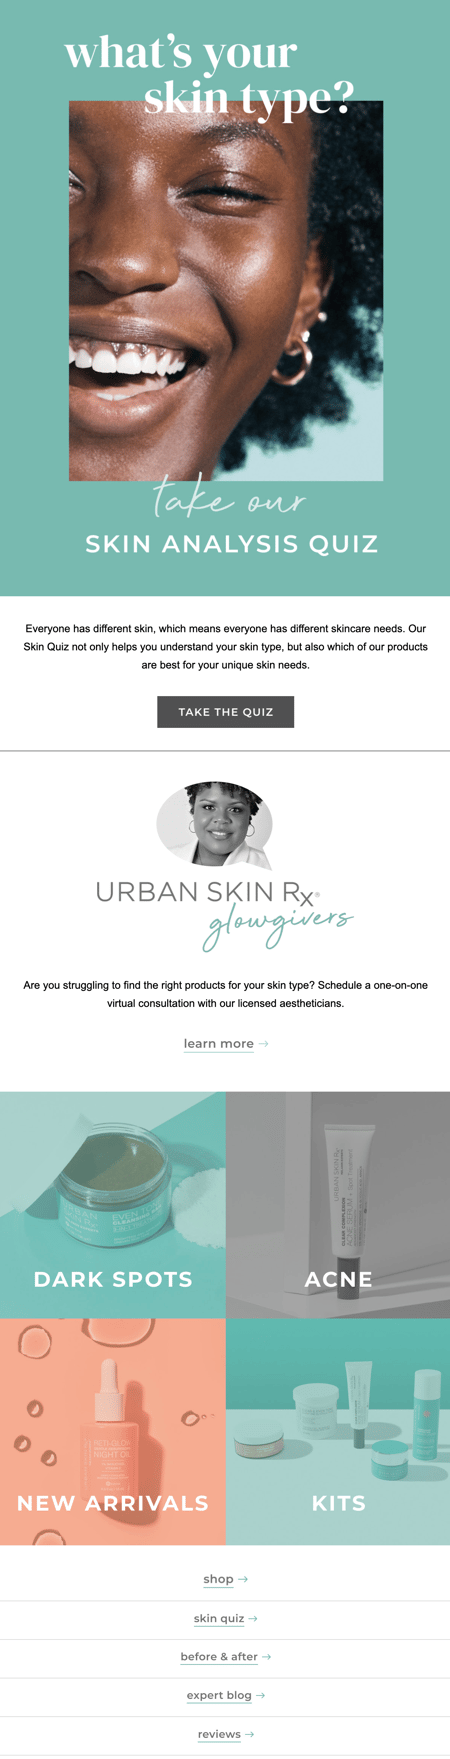 Urban Skin Rx product quiz email example